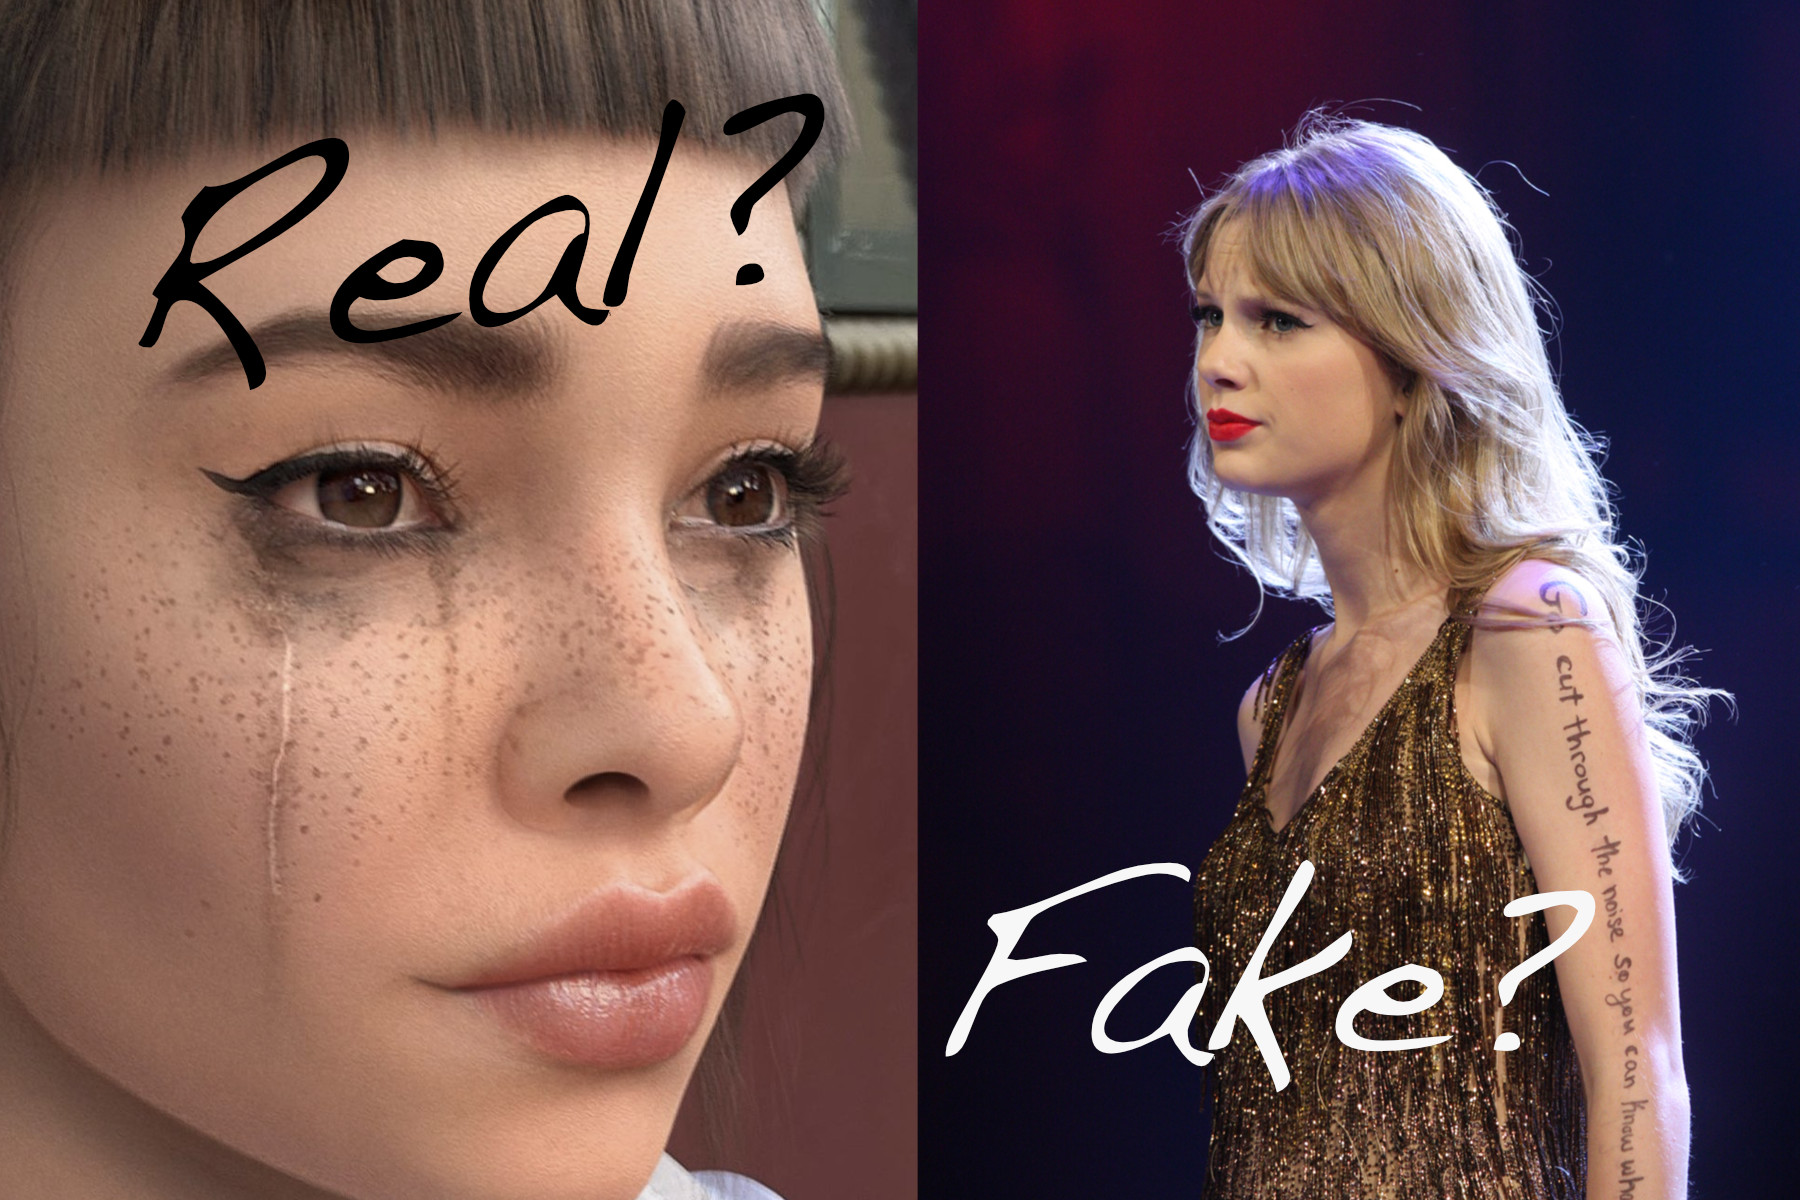 a composite image showing Miquela Sousa (left) and Taylor Swift (right)